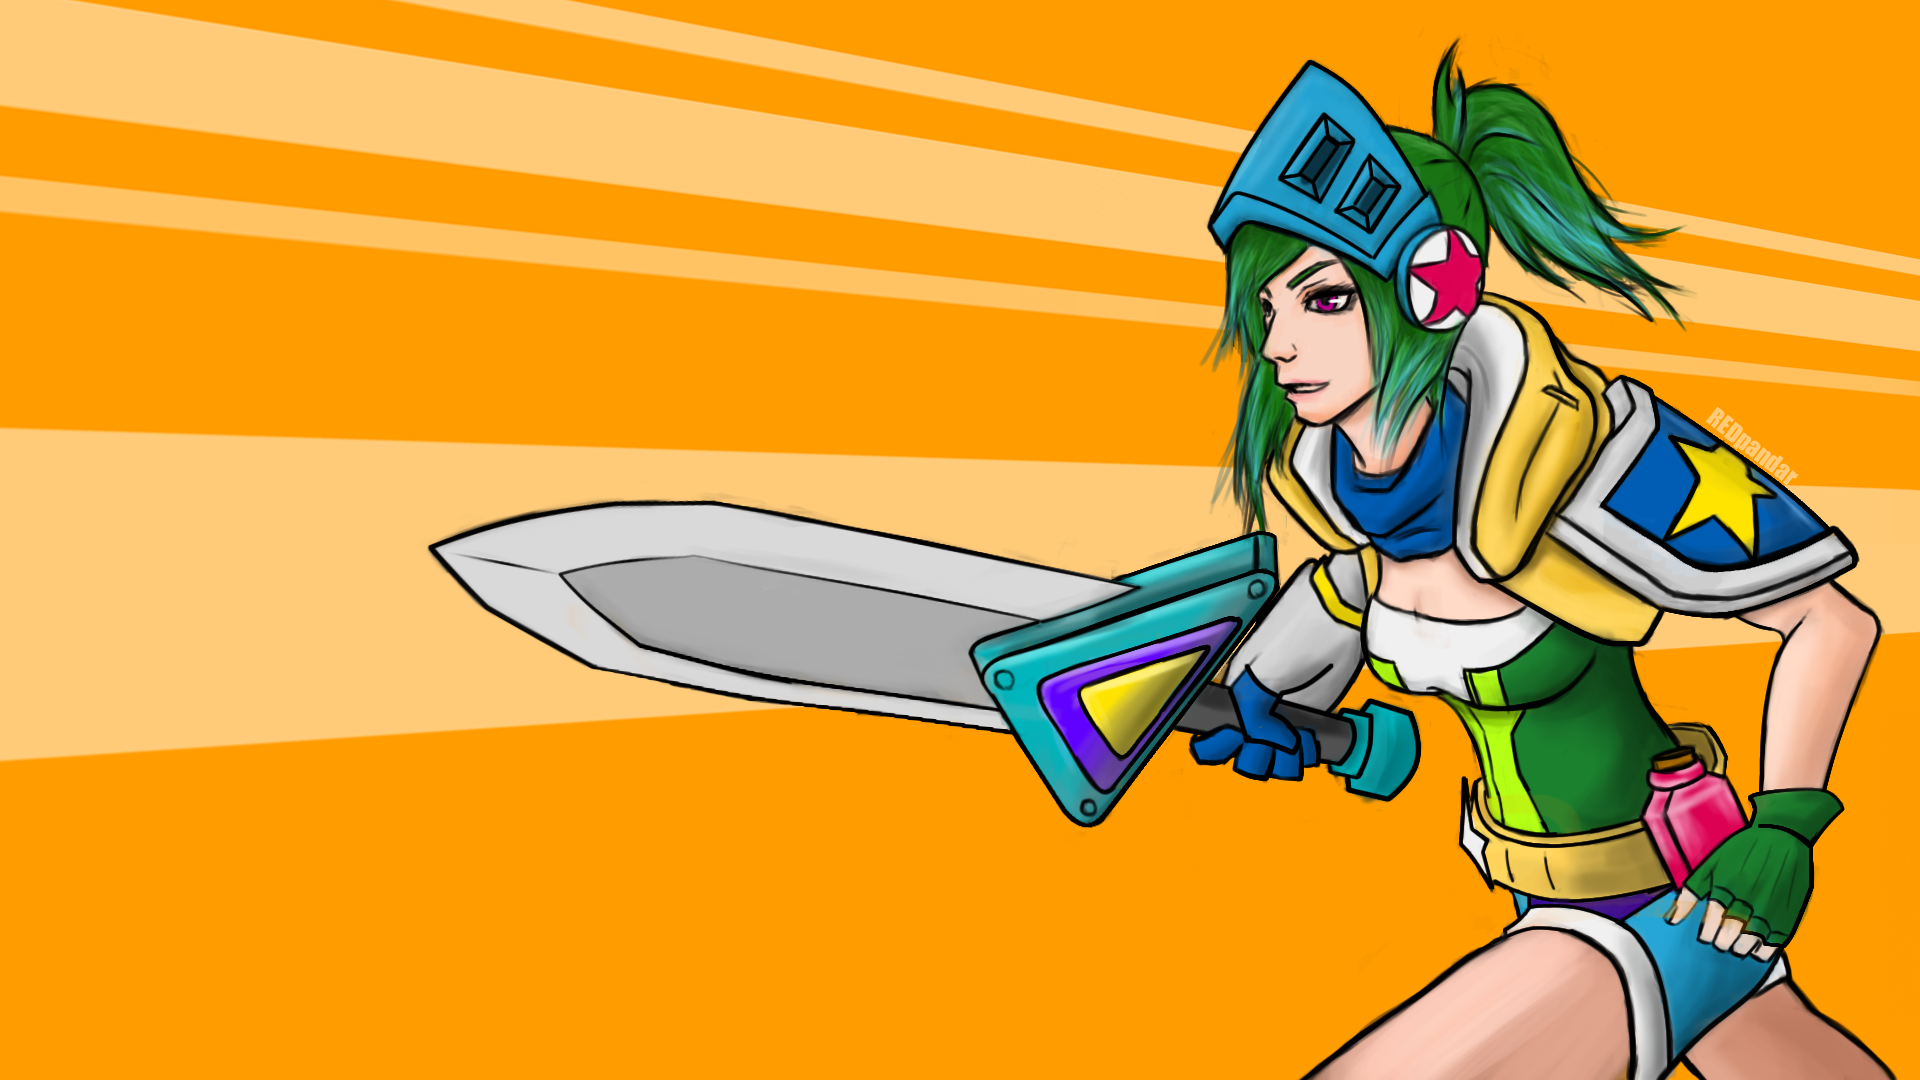 Arcade Riven Wallpaper By Merrycoffee